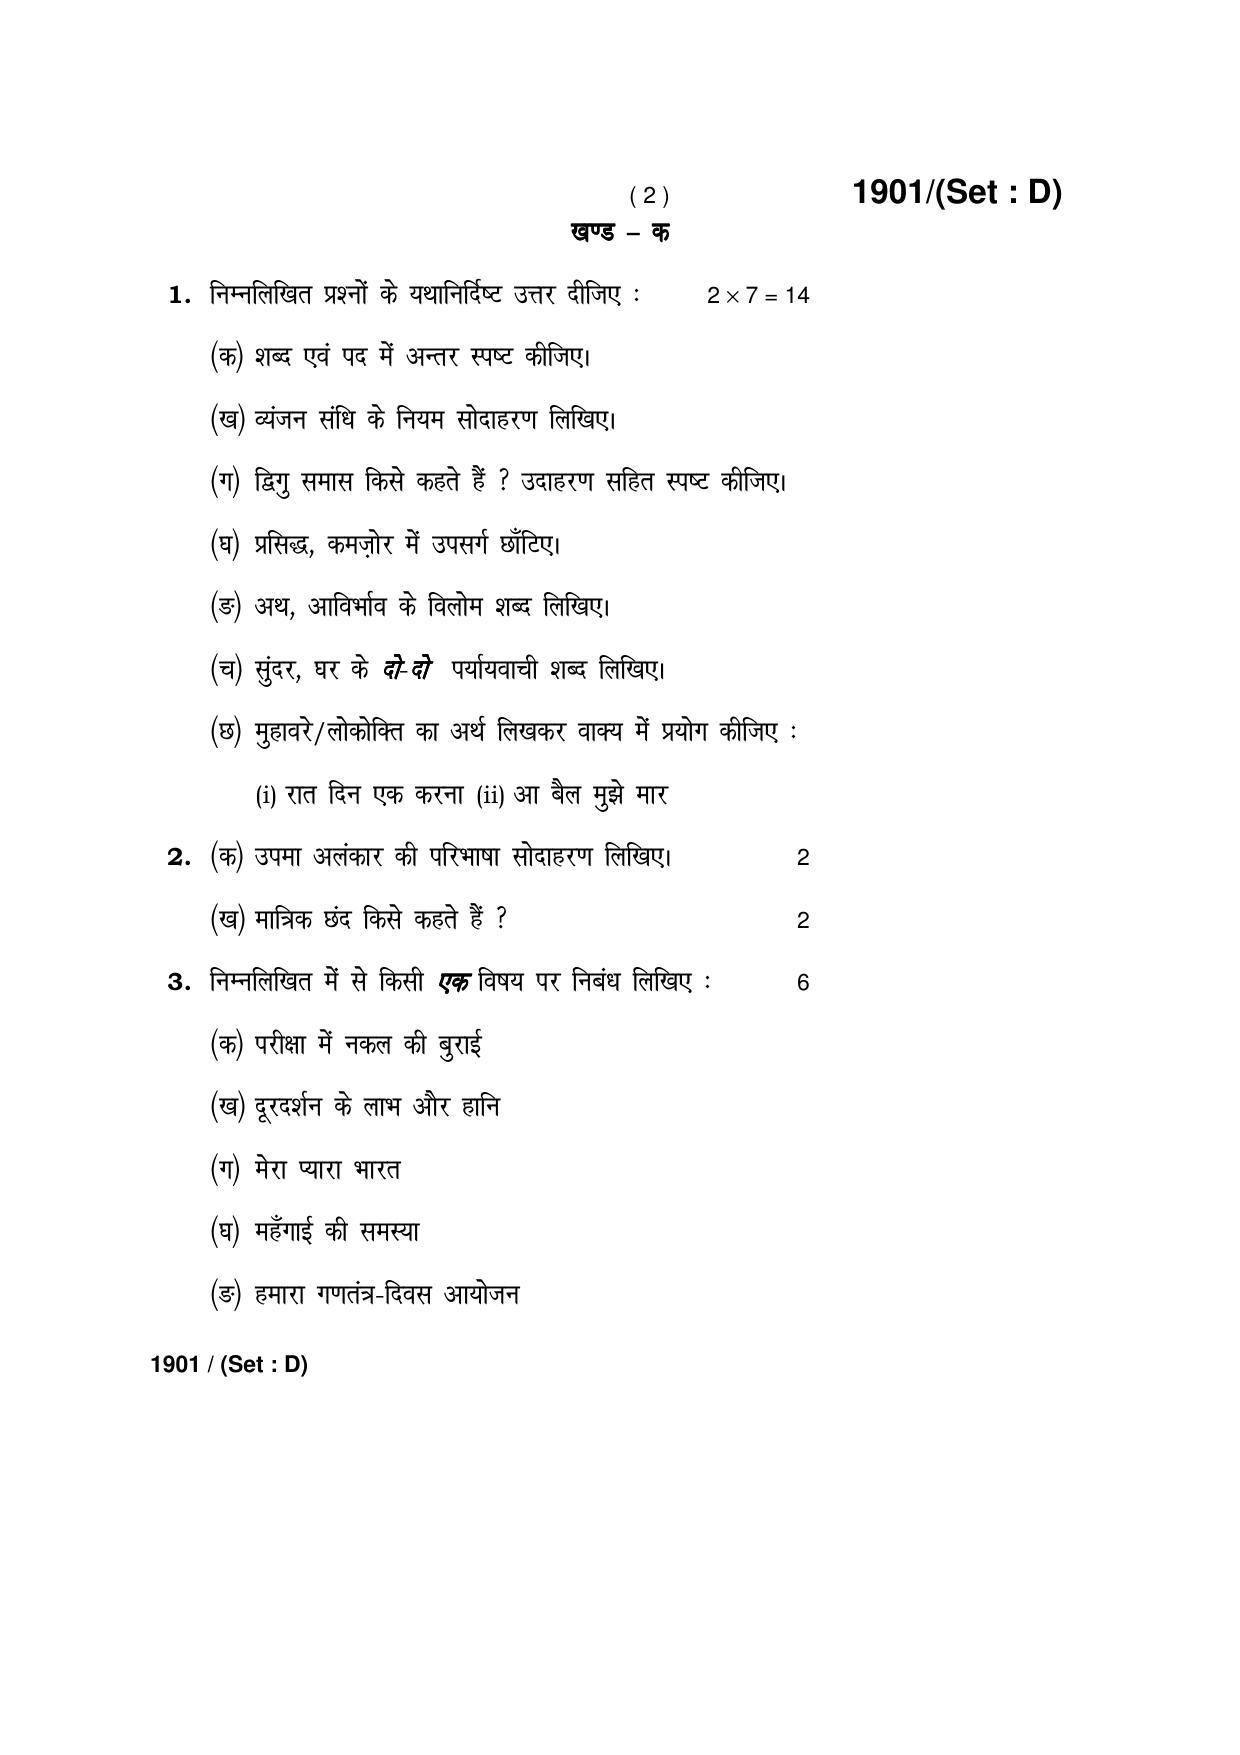 Haryana Board HBSE Class 10 Hindi -D 2017 Question Paper - Page 2